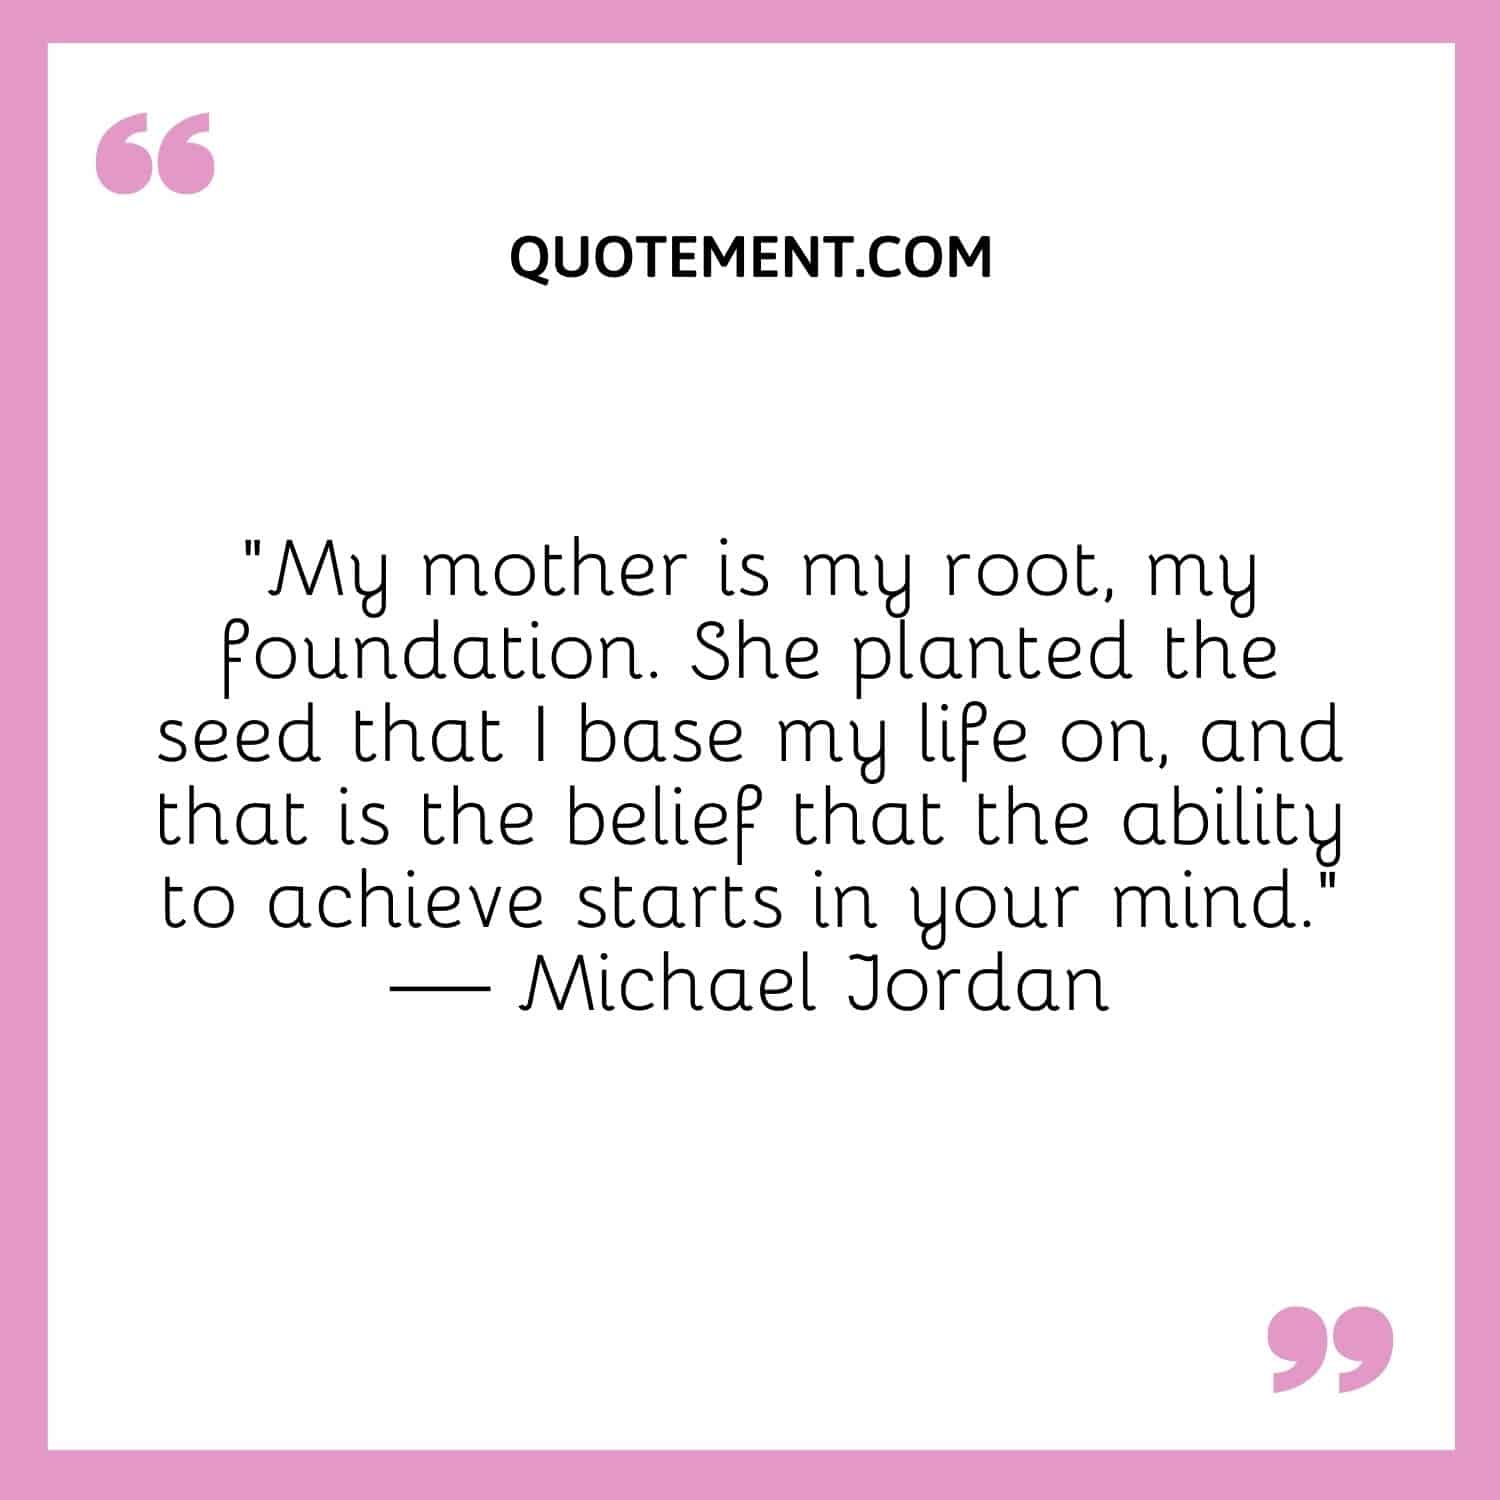 My mother is my root, my foundation.